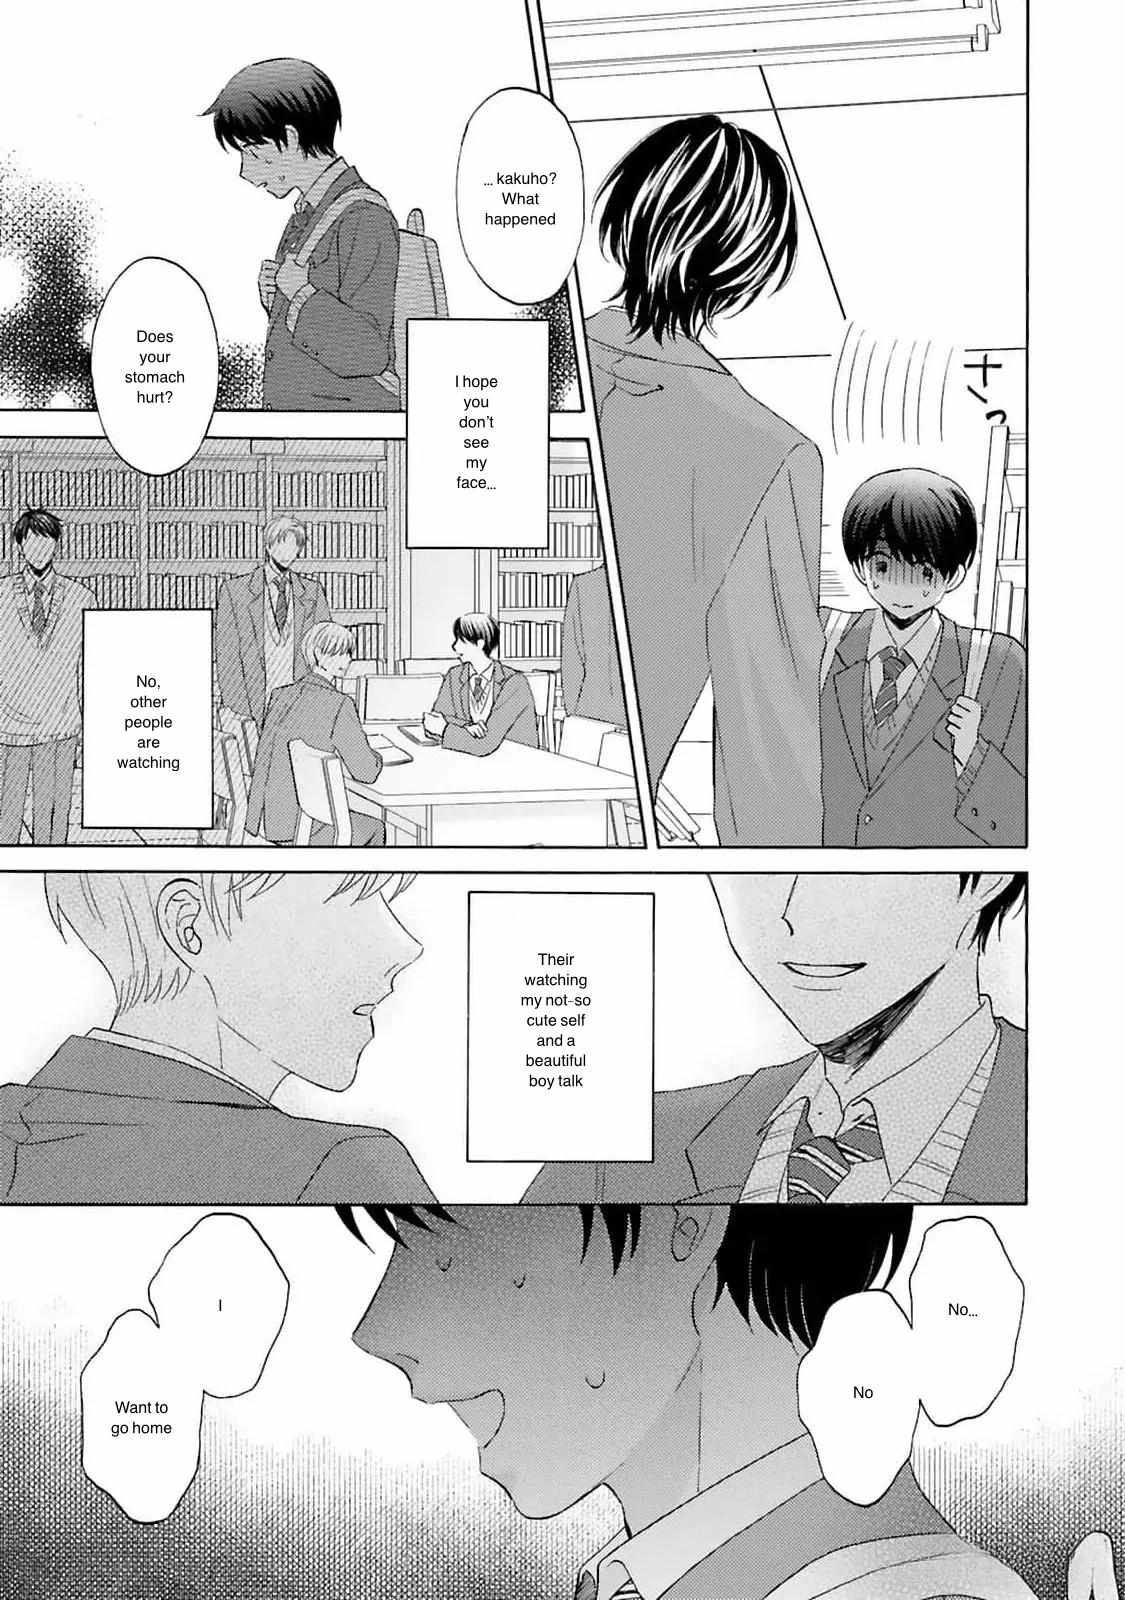 My Cutie Pie -An Ordinary Boy And His Gorgeous Childhood Friend- 〘Official〙 - 4 page 15-95716dd4